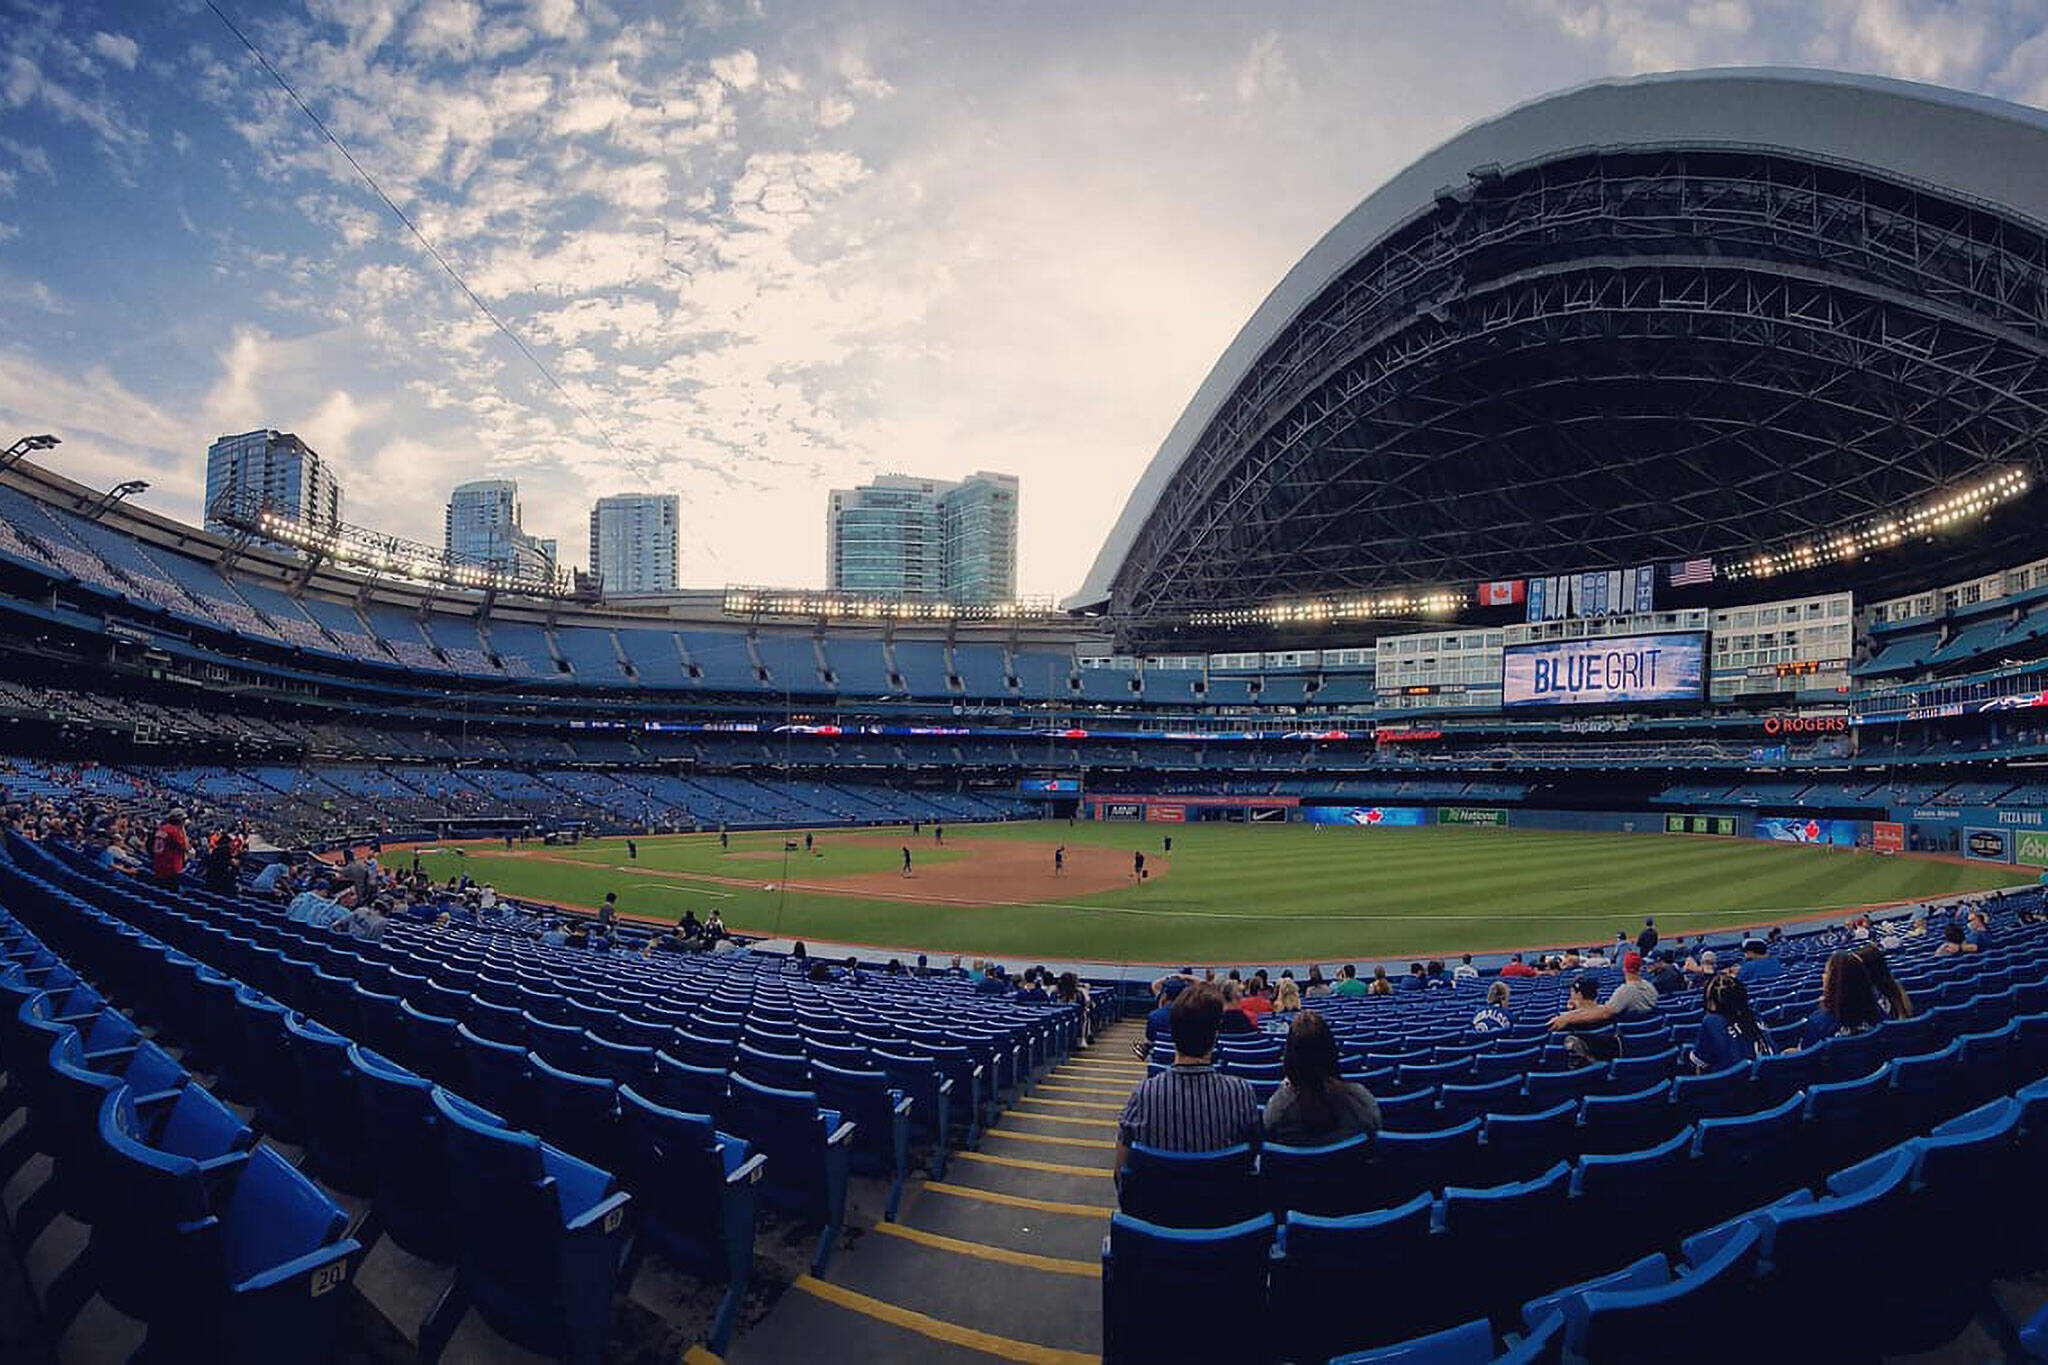 Rogers Centre bullpen area is the place to be for Blue Jays fans